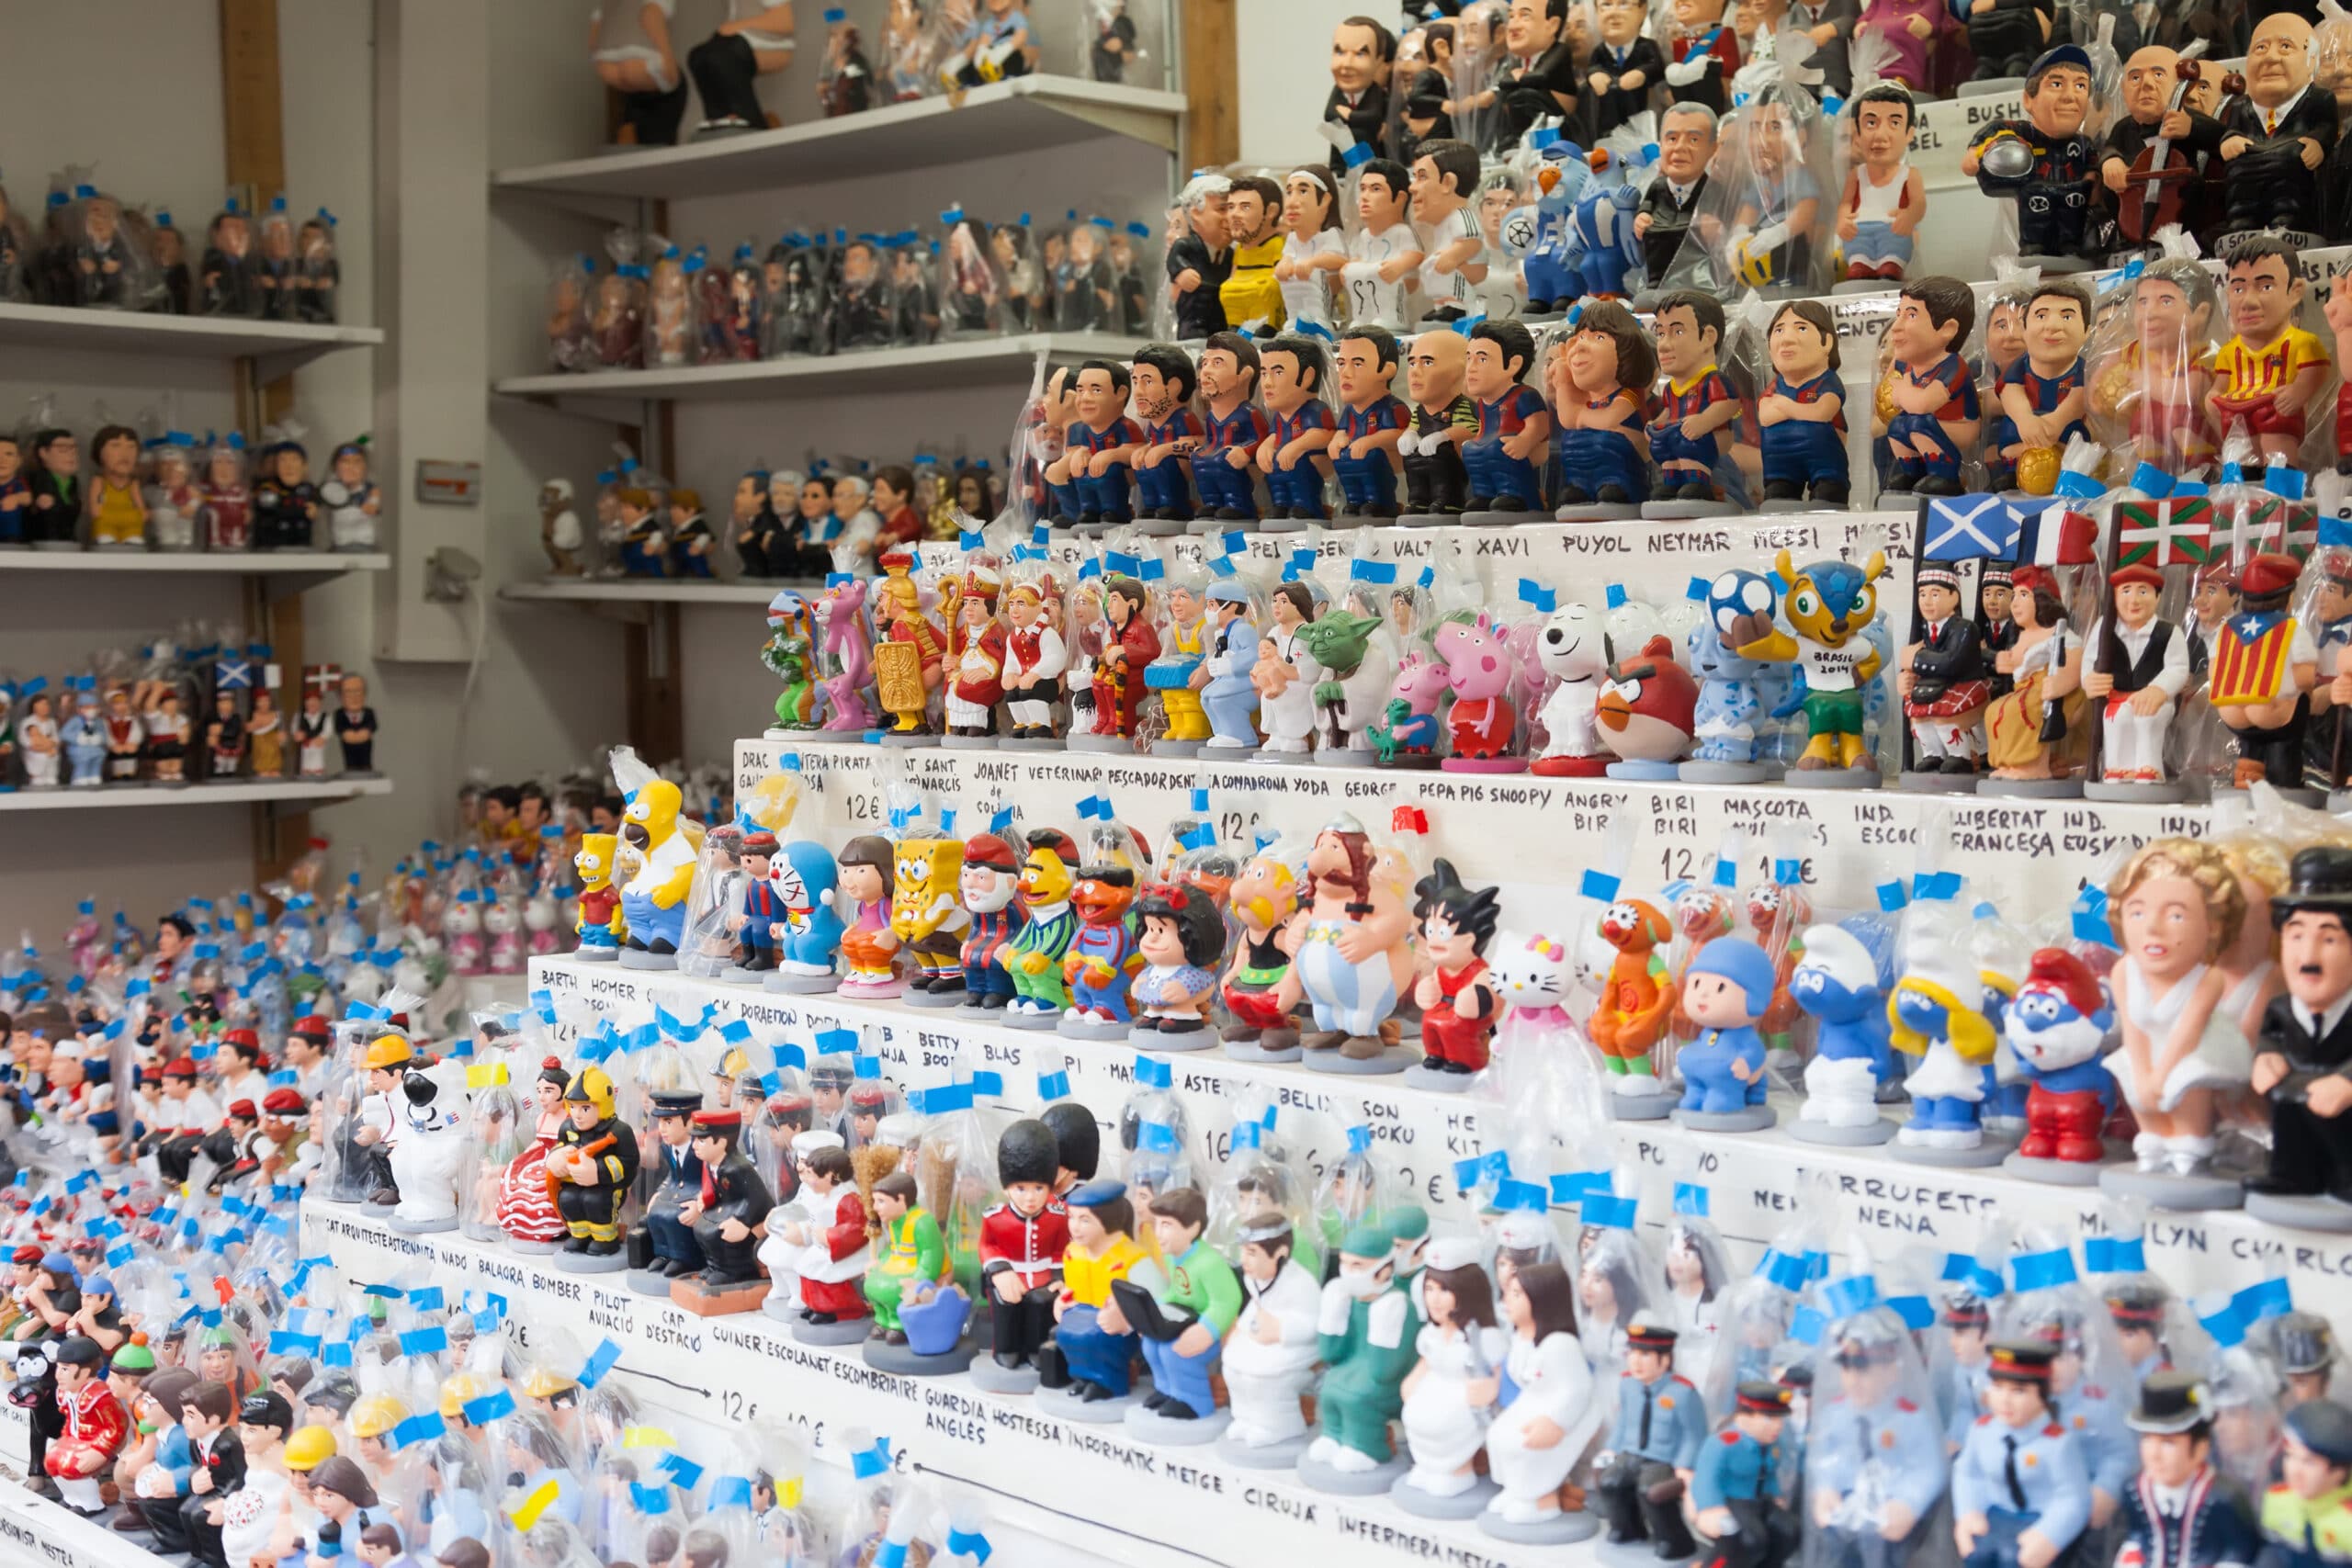 Figures Caganer